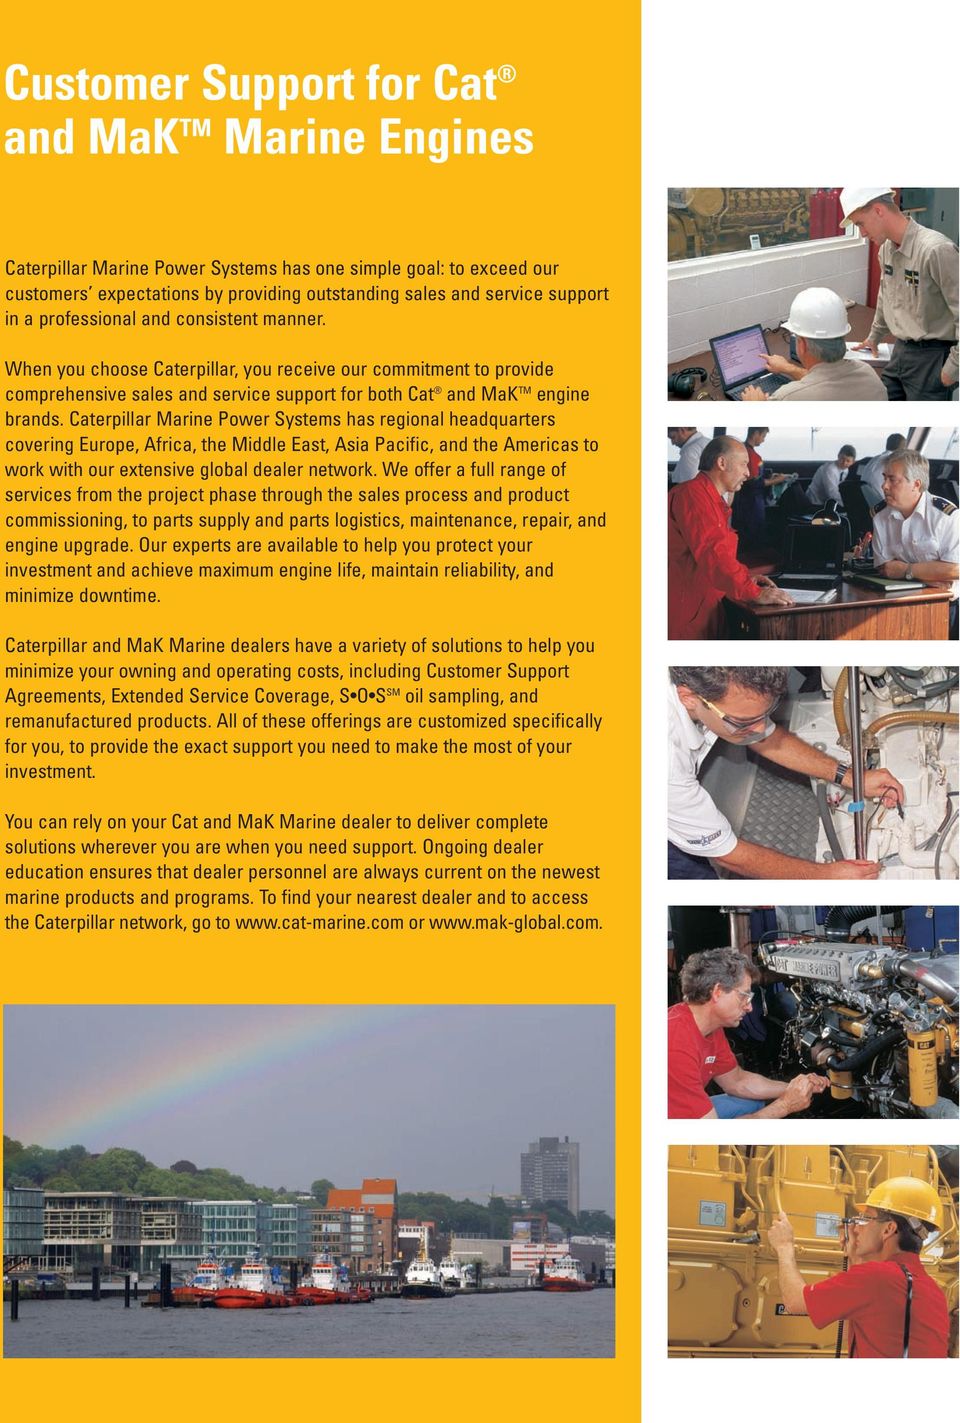 Caterpillar Marine Power Systems has regional headquarters covering Europe, Africa, the Middle East, Asia Pacific, and the Americas to work with our extensive global dealer network.